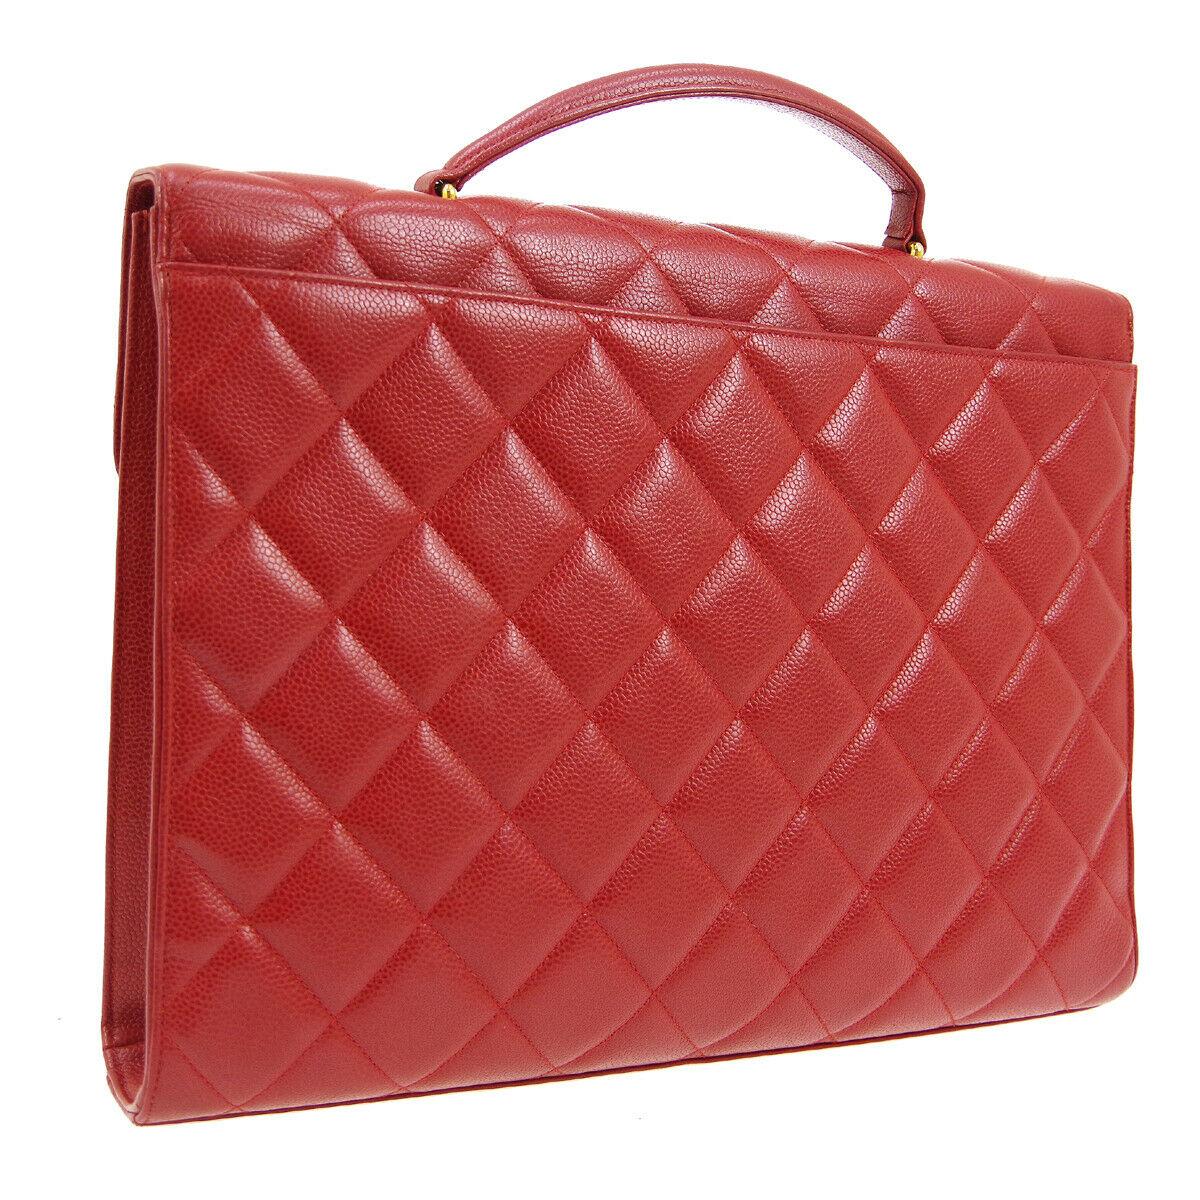 Women's Chanel Red Leather Gold Carryall Business Top Handle Travel Brief Briefcase Bag